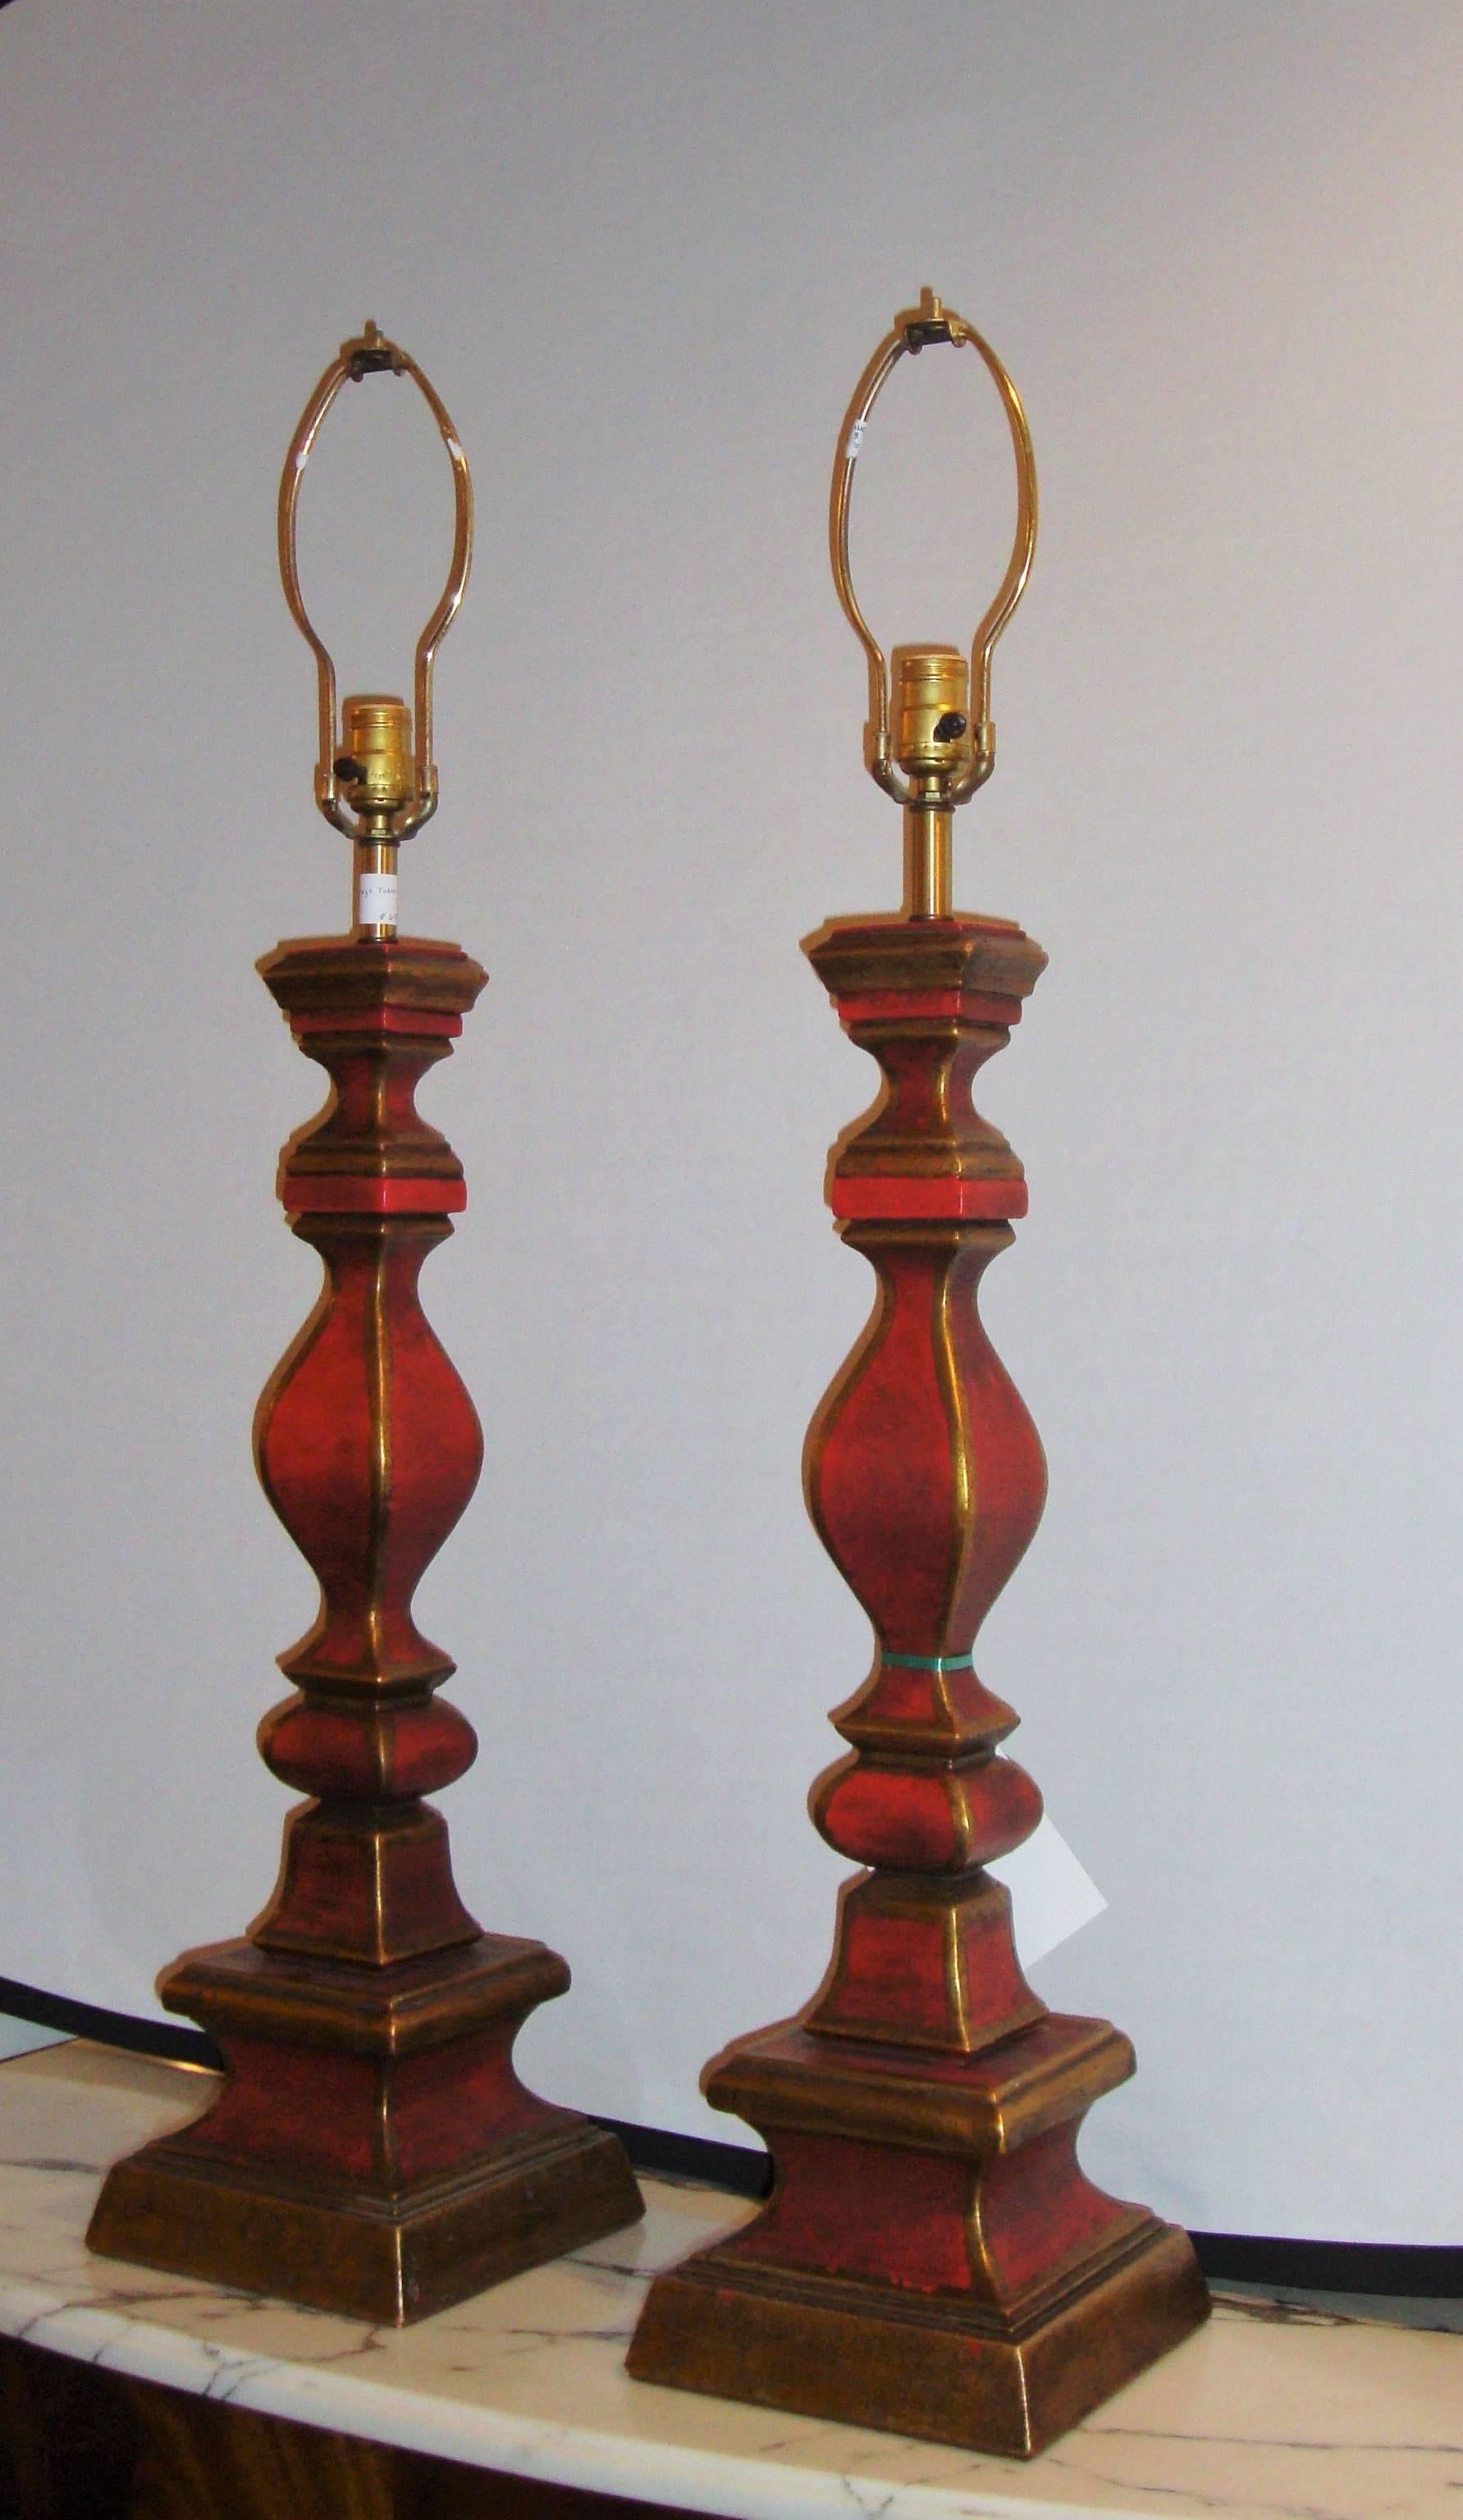 An elegant pair of vintage Italian table lamps painted in a beautiful gold and red, column form.
    
   